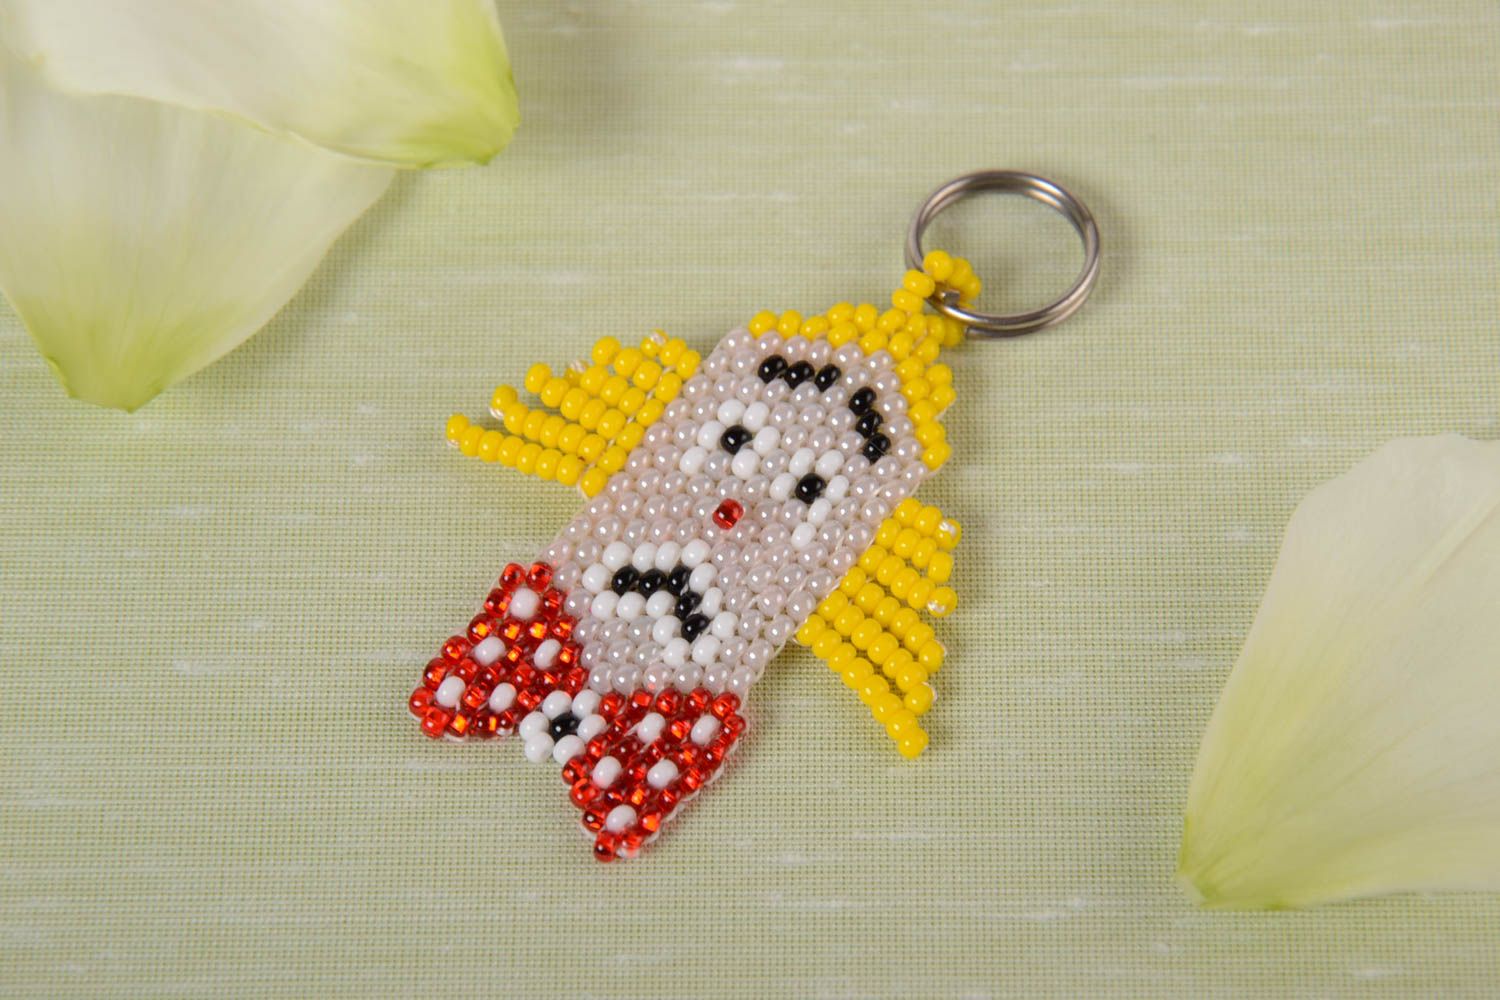 Keychain in shape of clown handmade stylish accessories cute souvenirs photo 1